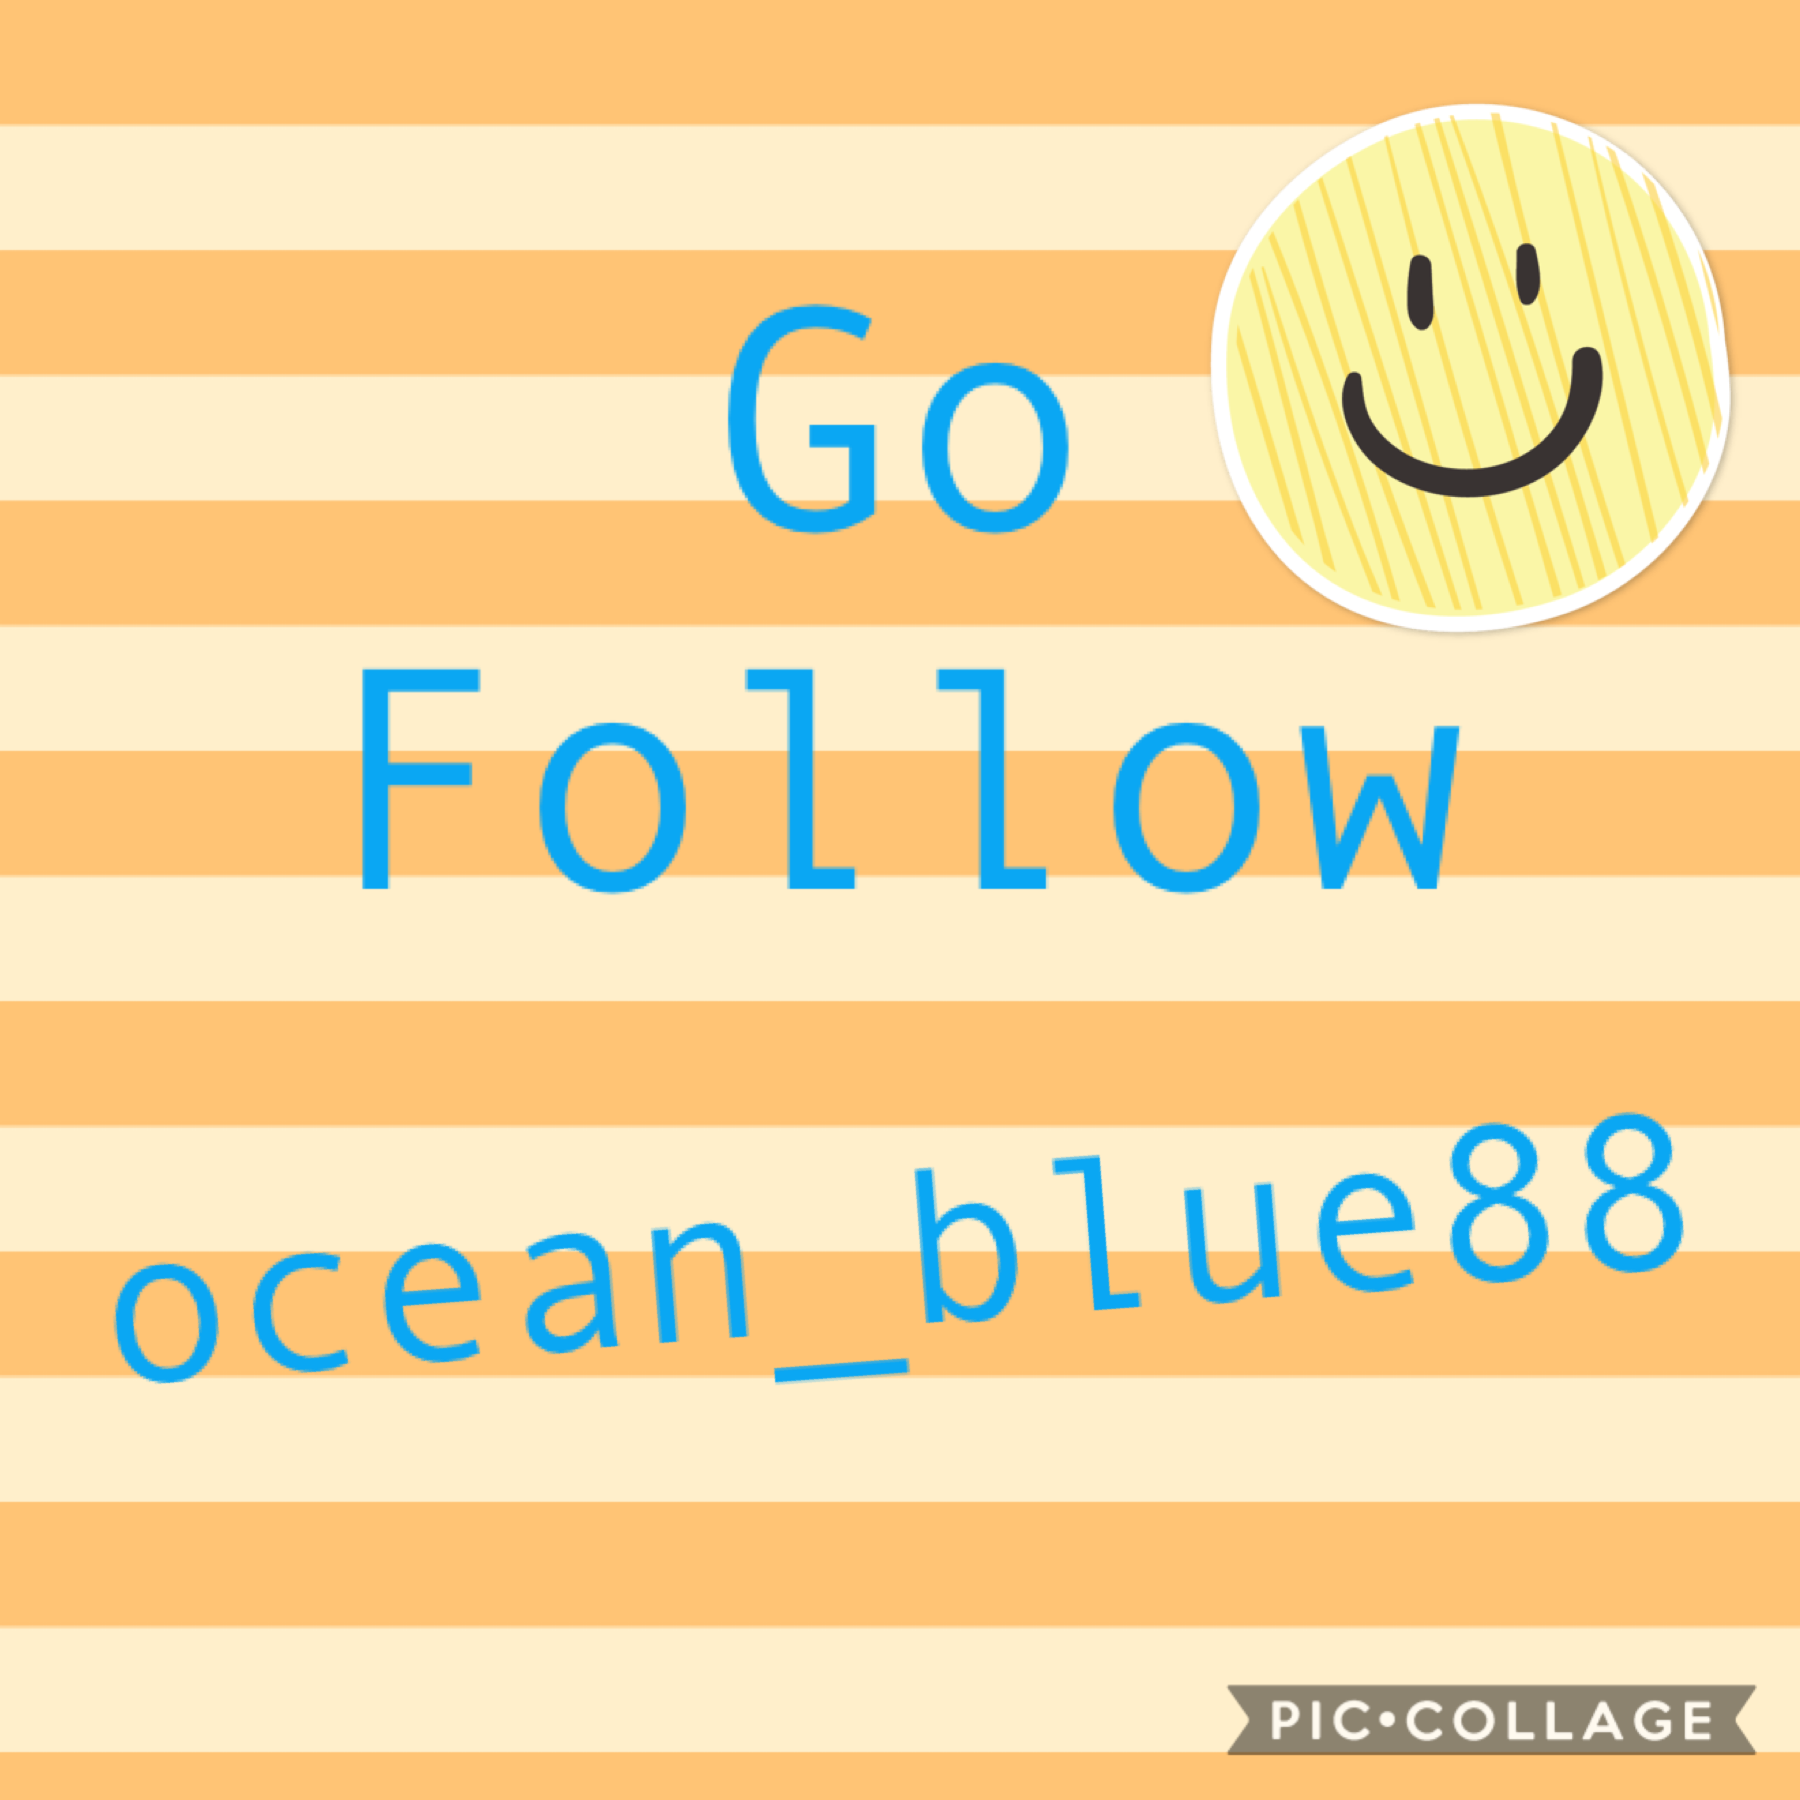 @ocean_blue88 Thank you for liking my posts